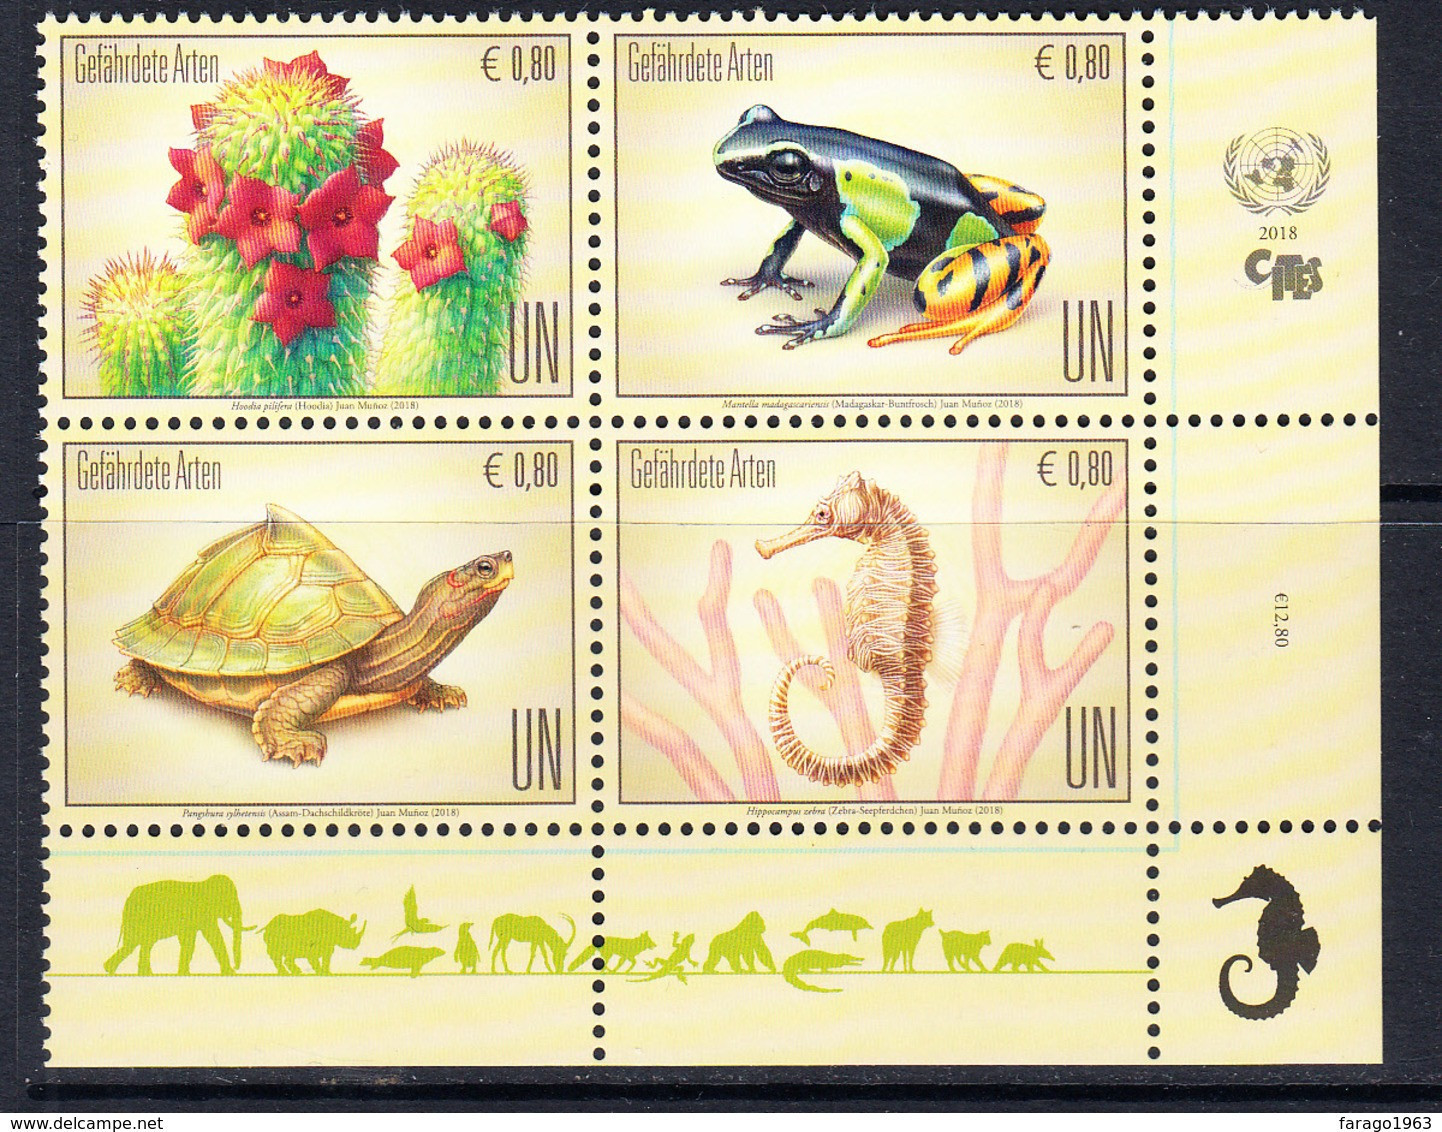 2018 United Nations Vienna CITES Endangered Reptiles Frogs Turtles  Complete Block Of 4  MNH @ BELOW FACE VALUE - Neufs